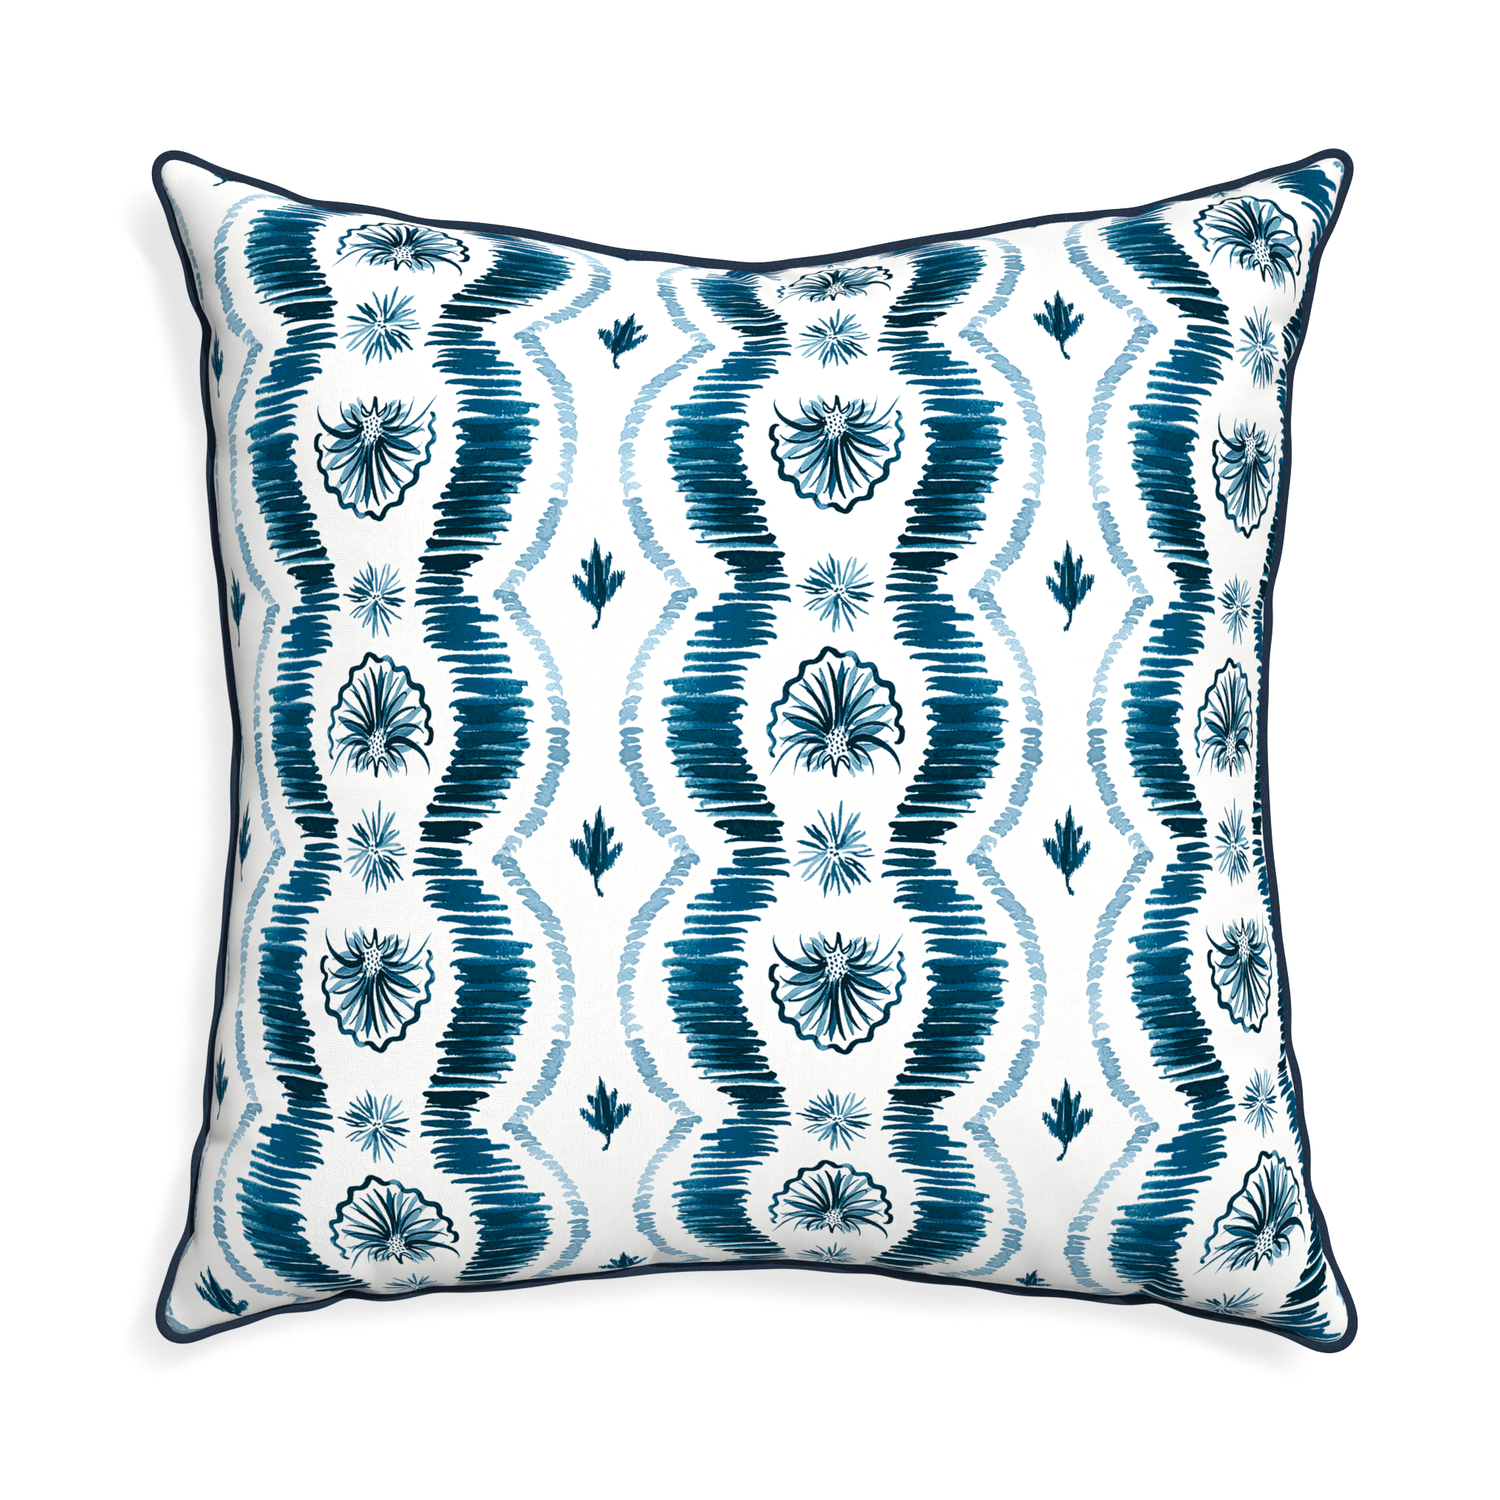 Euro-sham alice custom blue ikatpillow with c piping on white background